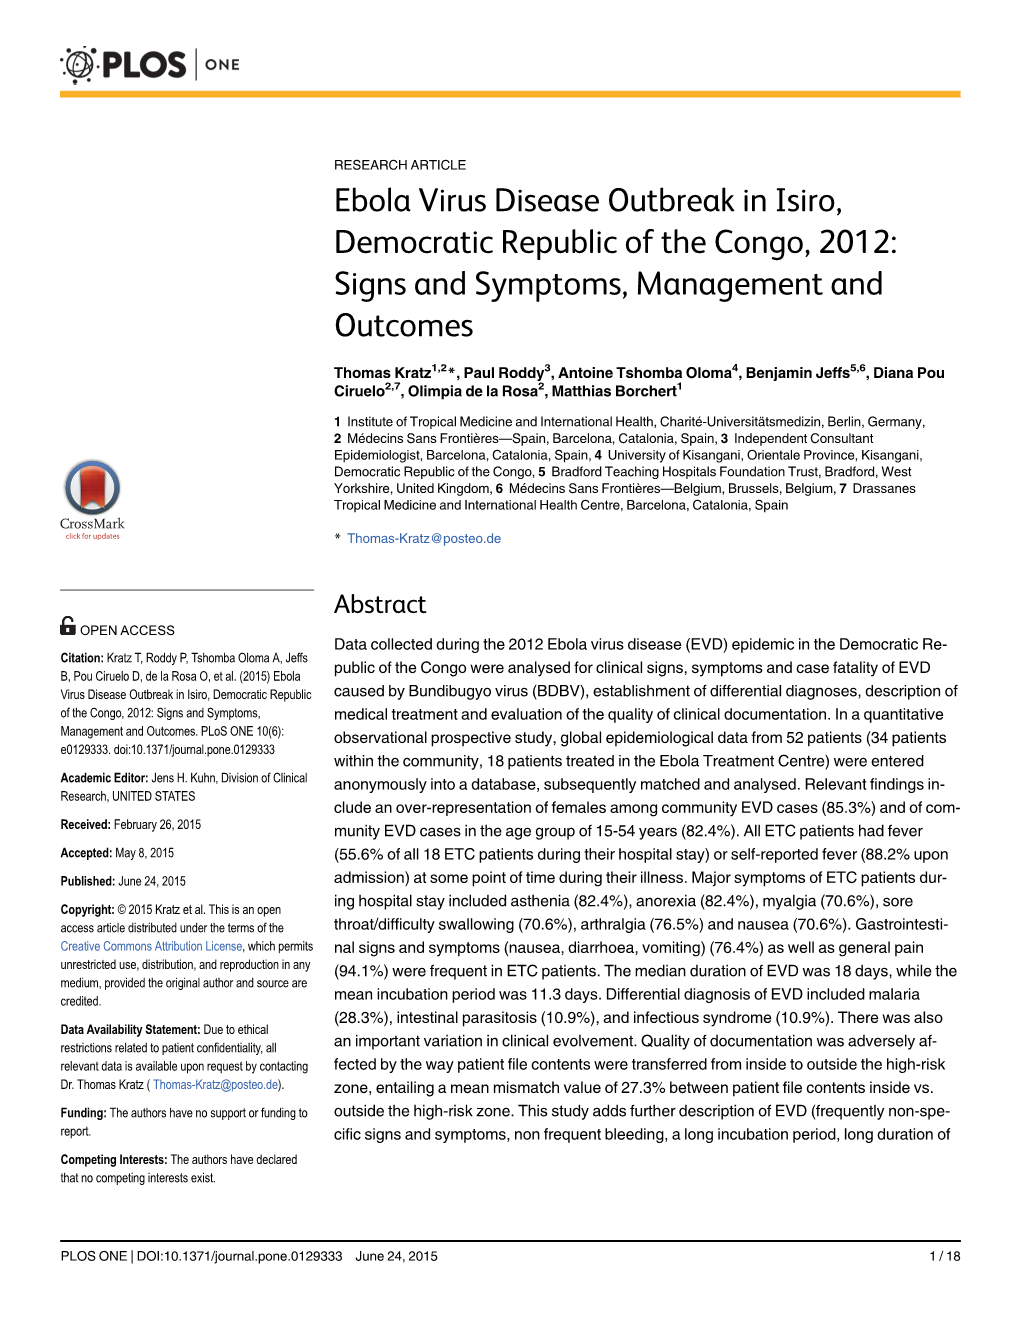 Ebola Virus Disease Outbreak in Isiro, Democratic Republic of the Congo, 2012: Signs and Symptoms, Management and Outcomes